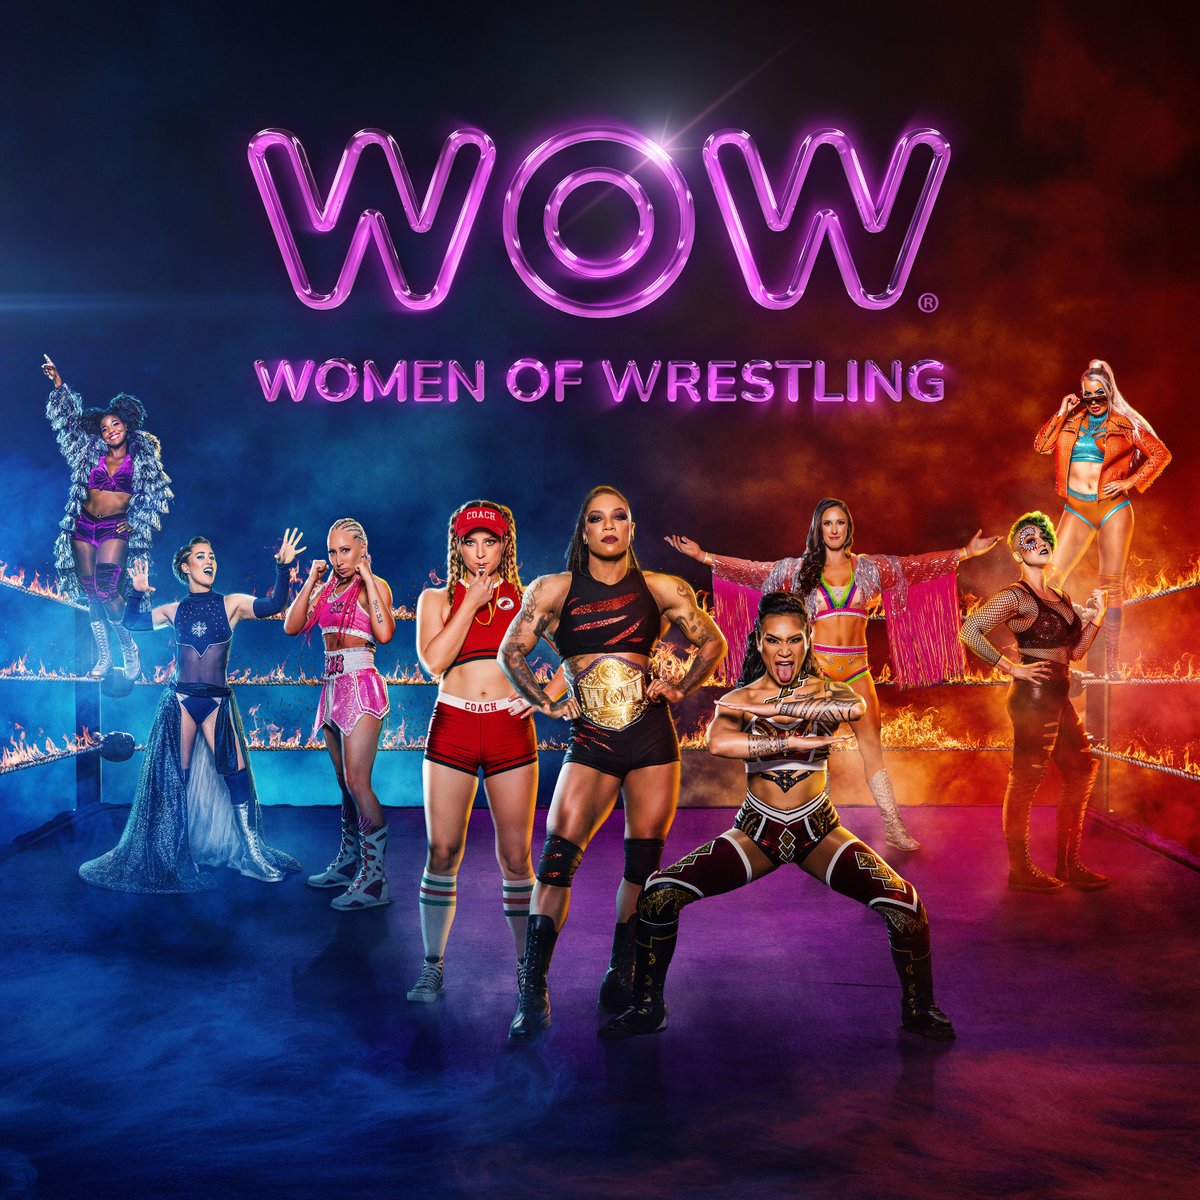 “The Beast Returns!” - The Beast has returned after ten months of injury and is now looking to reclaim her championship and solve the mystery of who attacked her and broke her leg in an alleyway. Watch a NEW @wowsuperheroes tonight at 10 on WBCB!